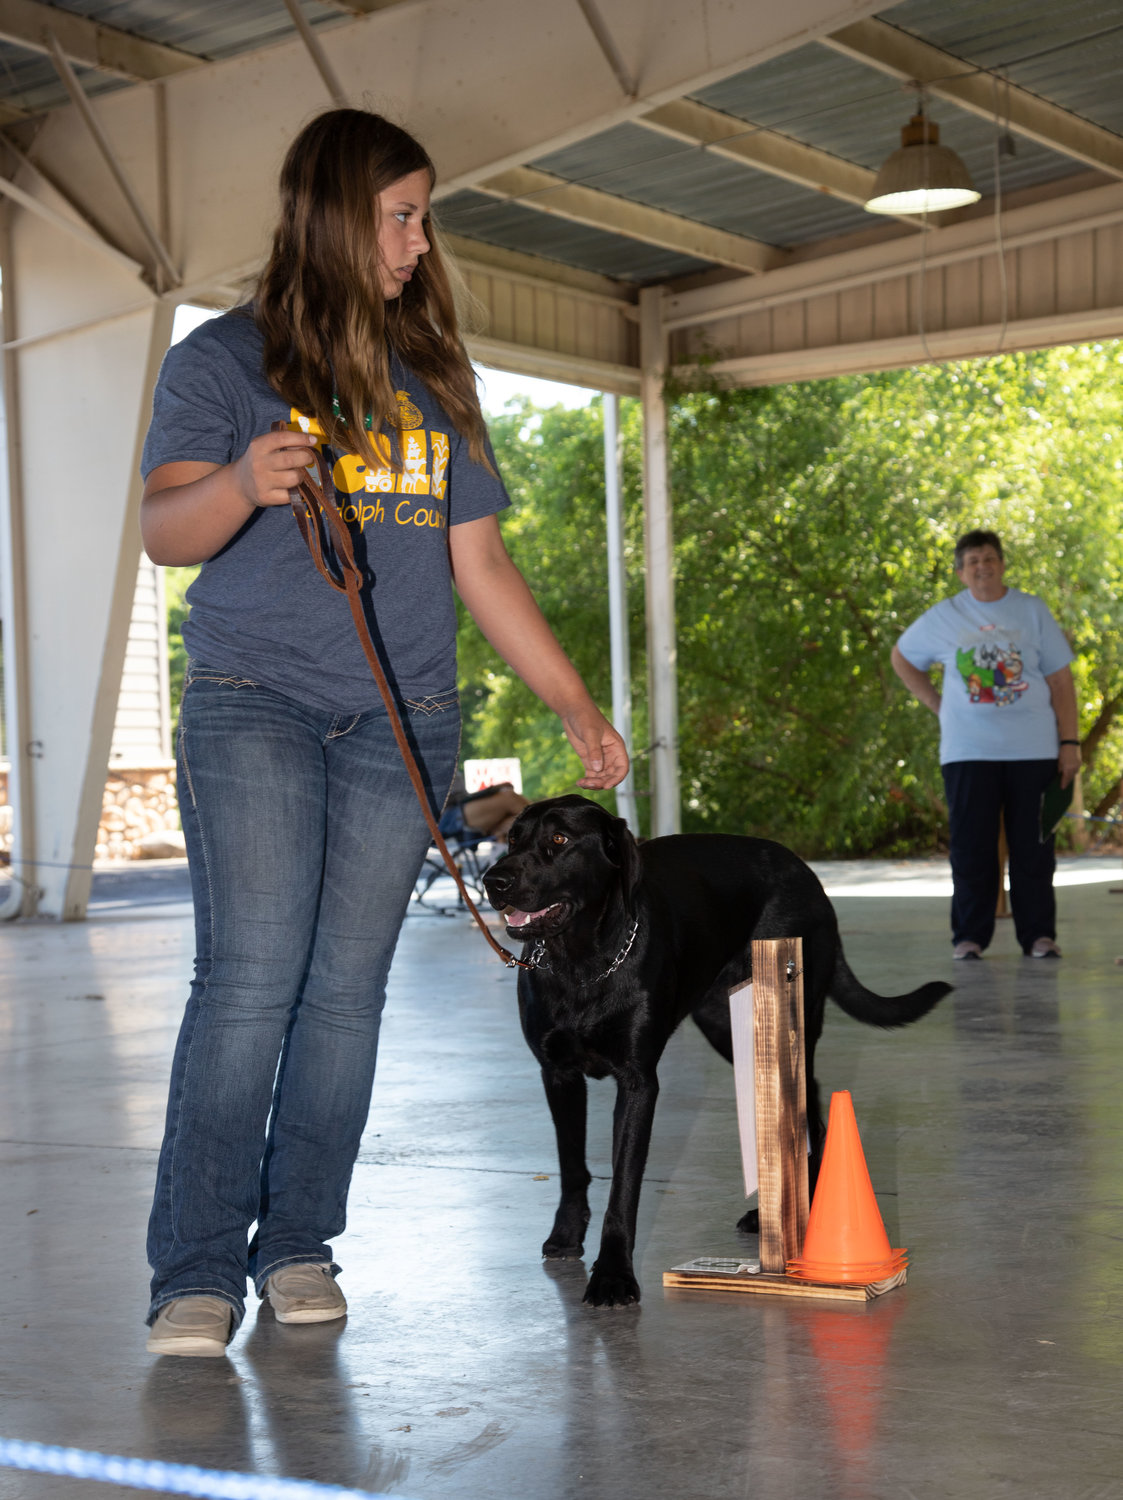 Gallery: Dog Show, Randolph County Fair - Moberly Monitor-Index